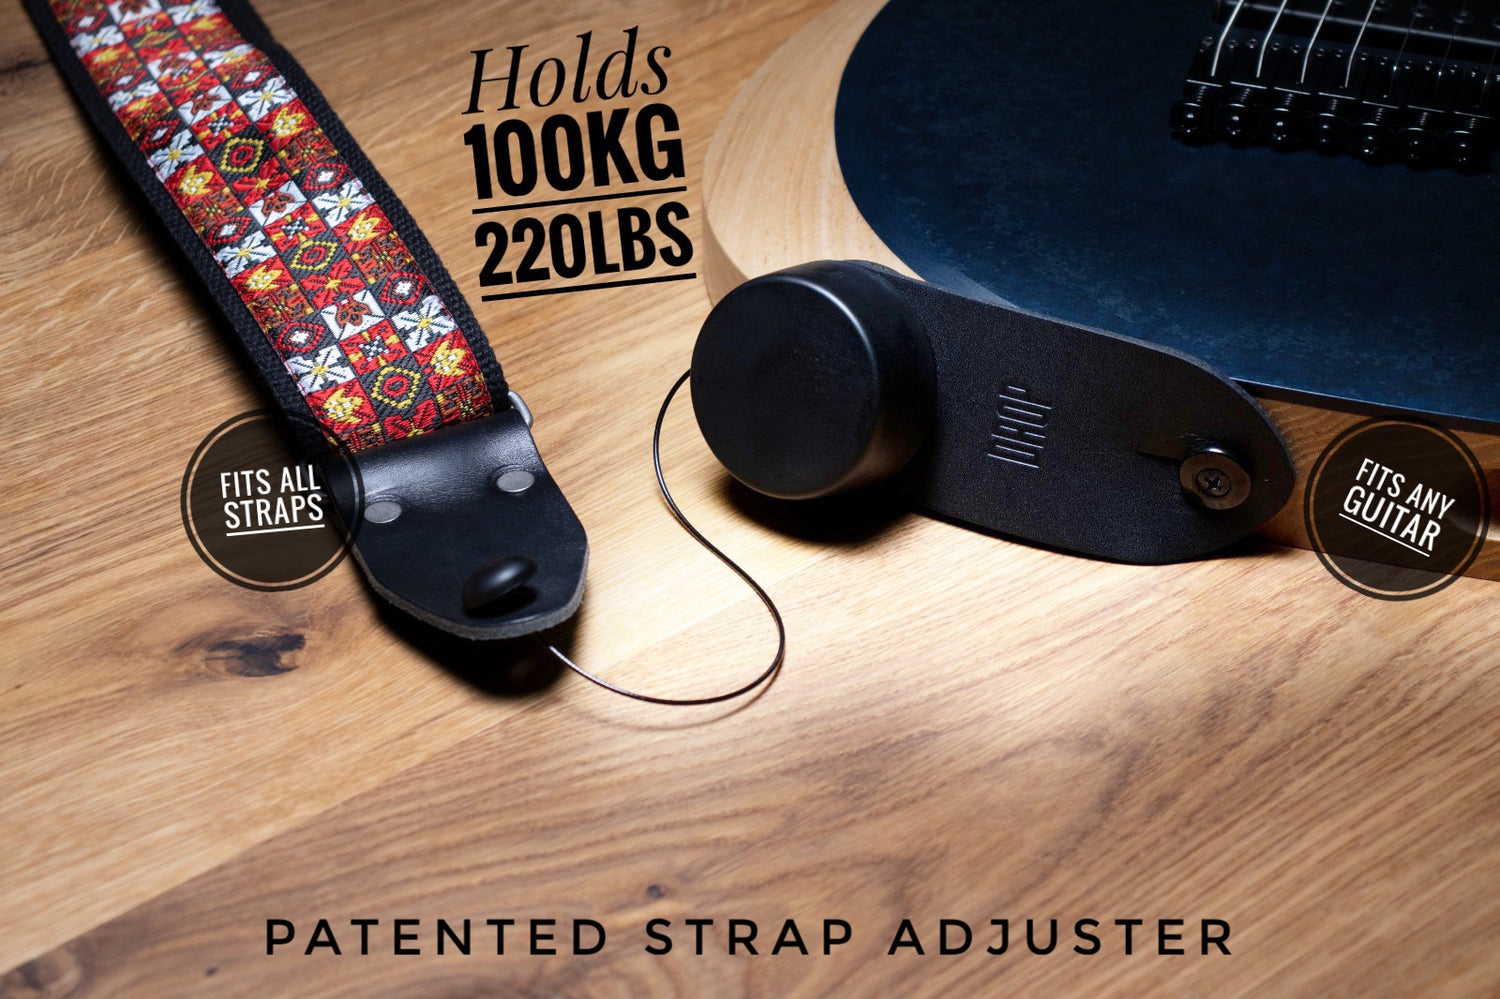 Patented strap adjuster let you adjust according to fretting